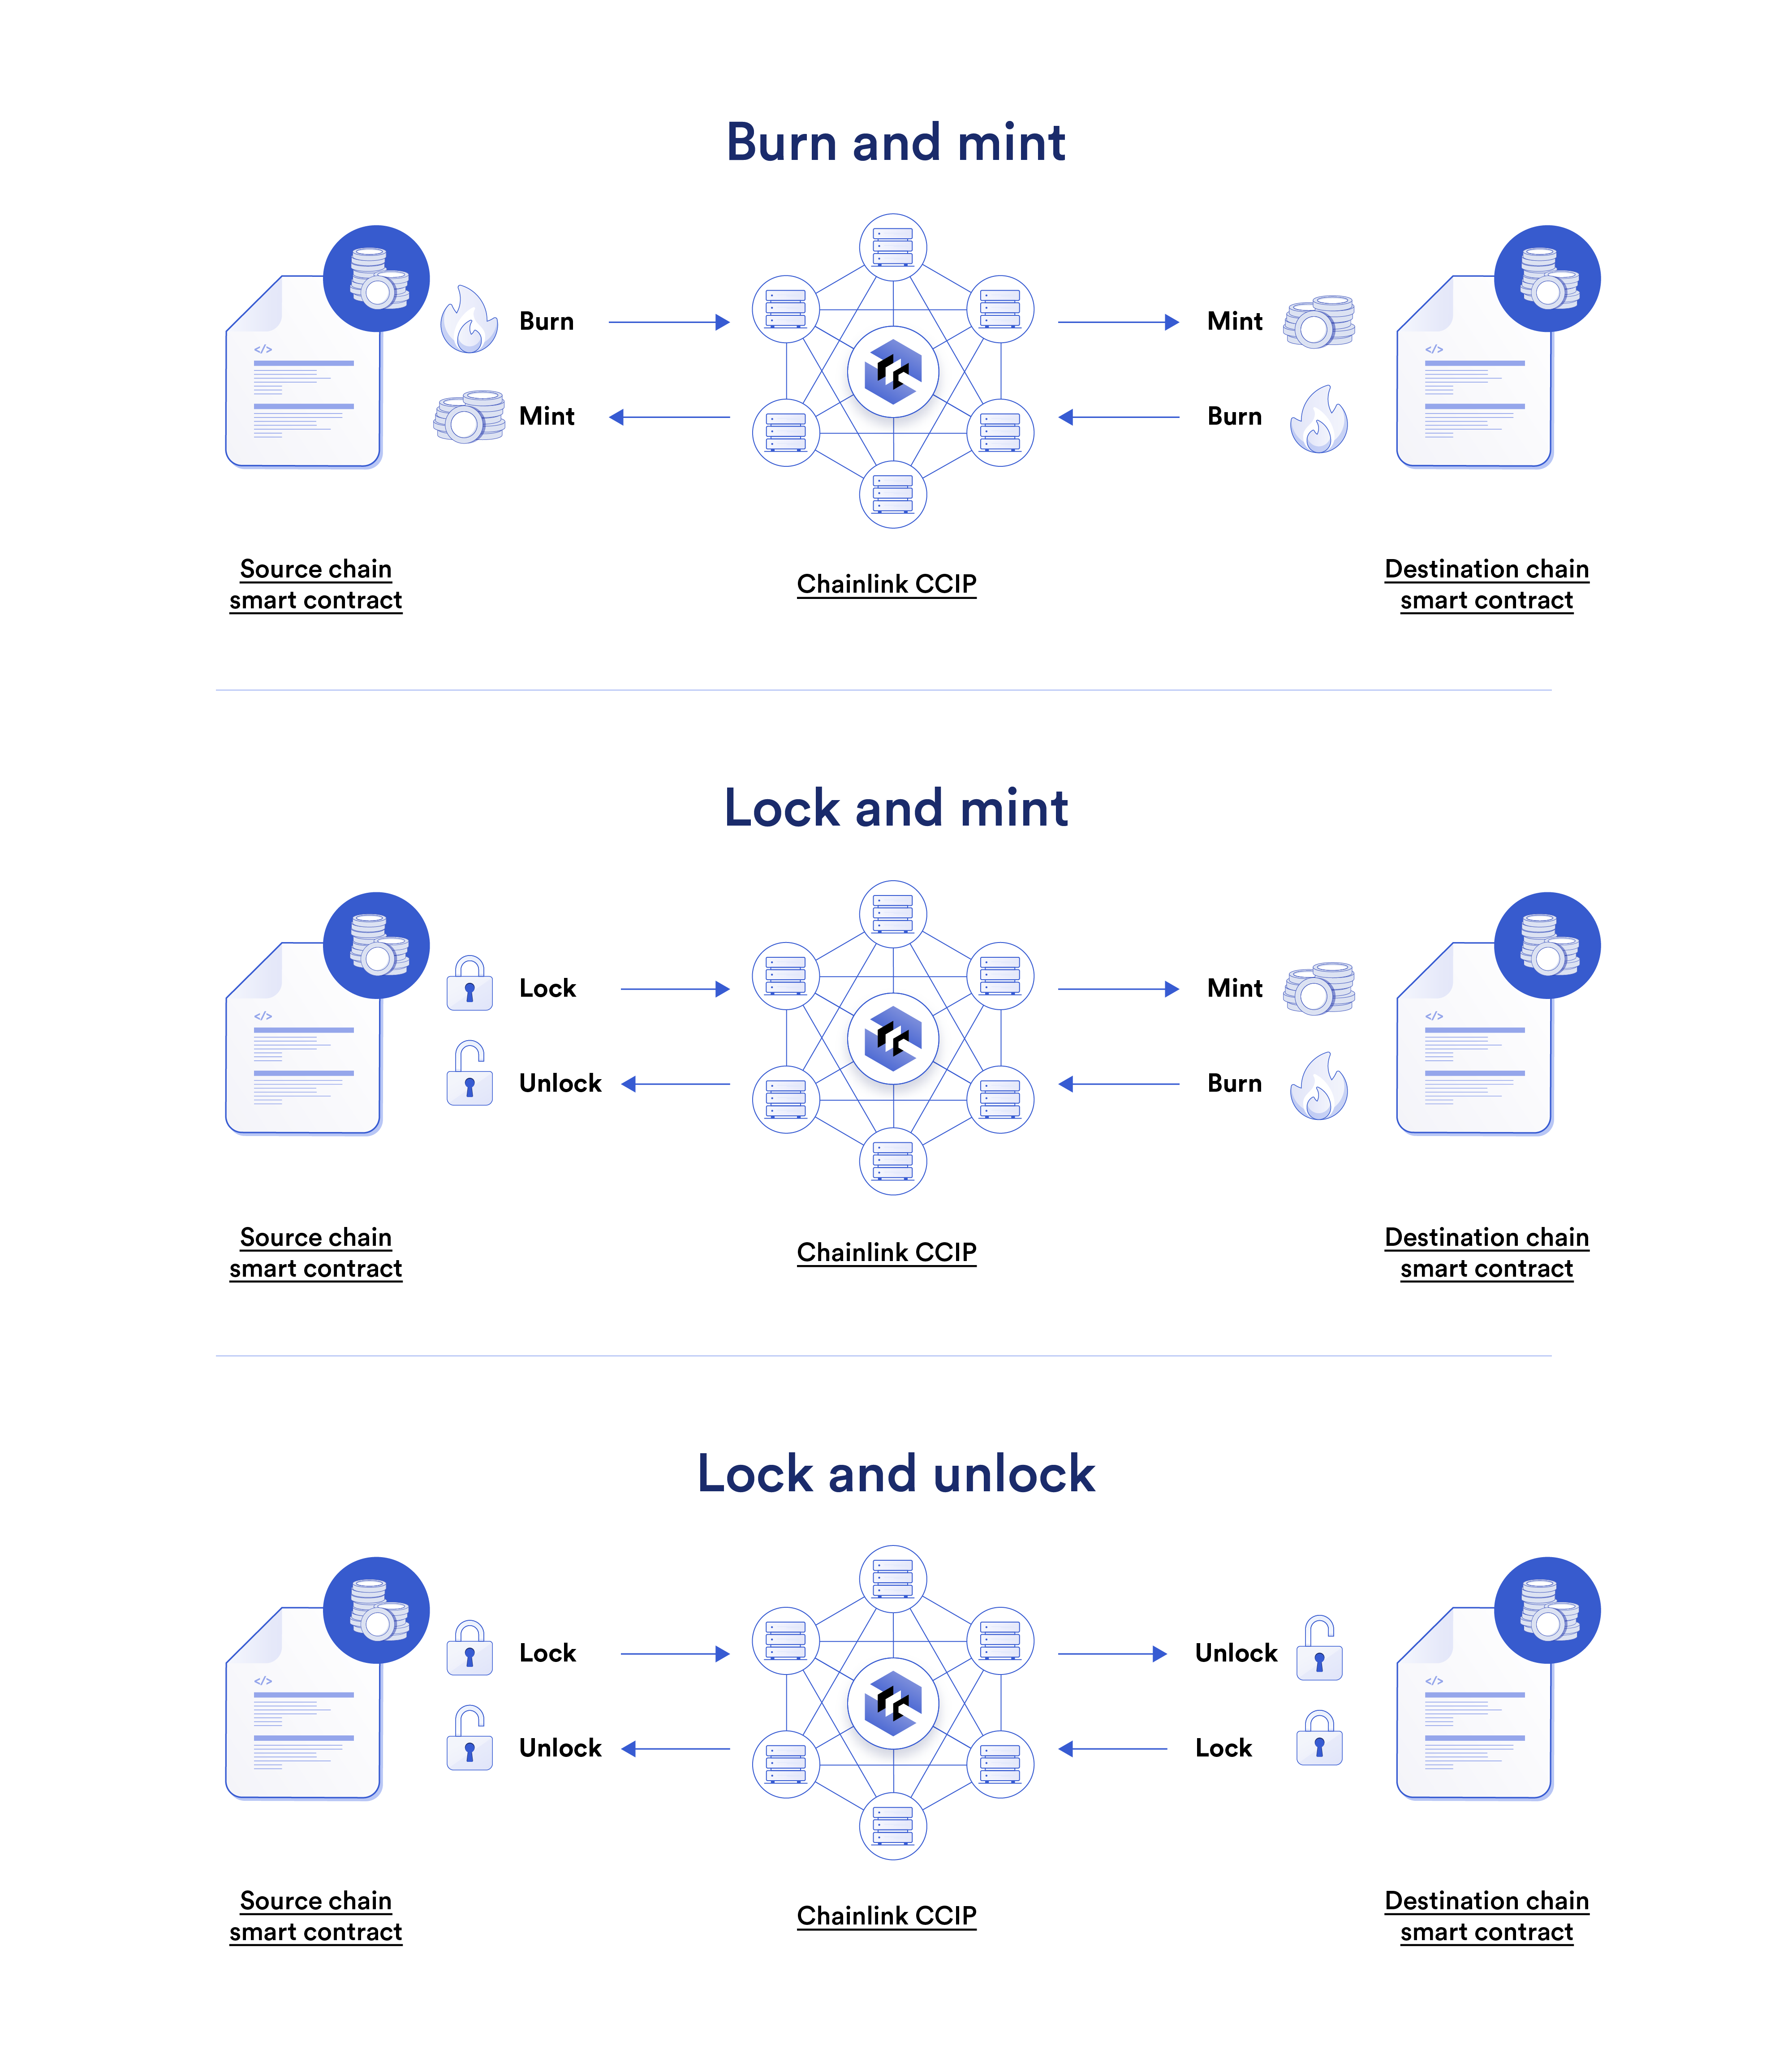 Chainlink CCIP supports burn and mint, lock and mint, and lock and unlock token transfer mechanisms.